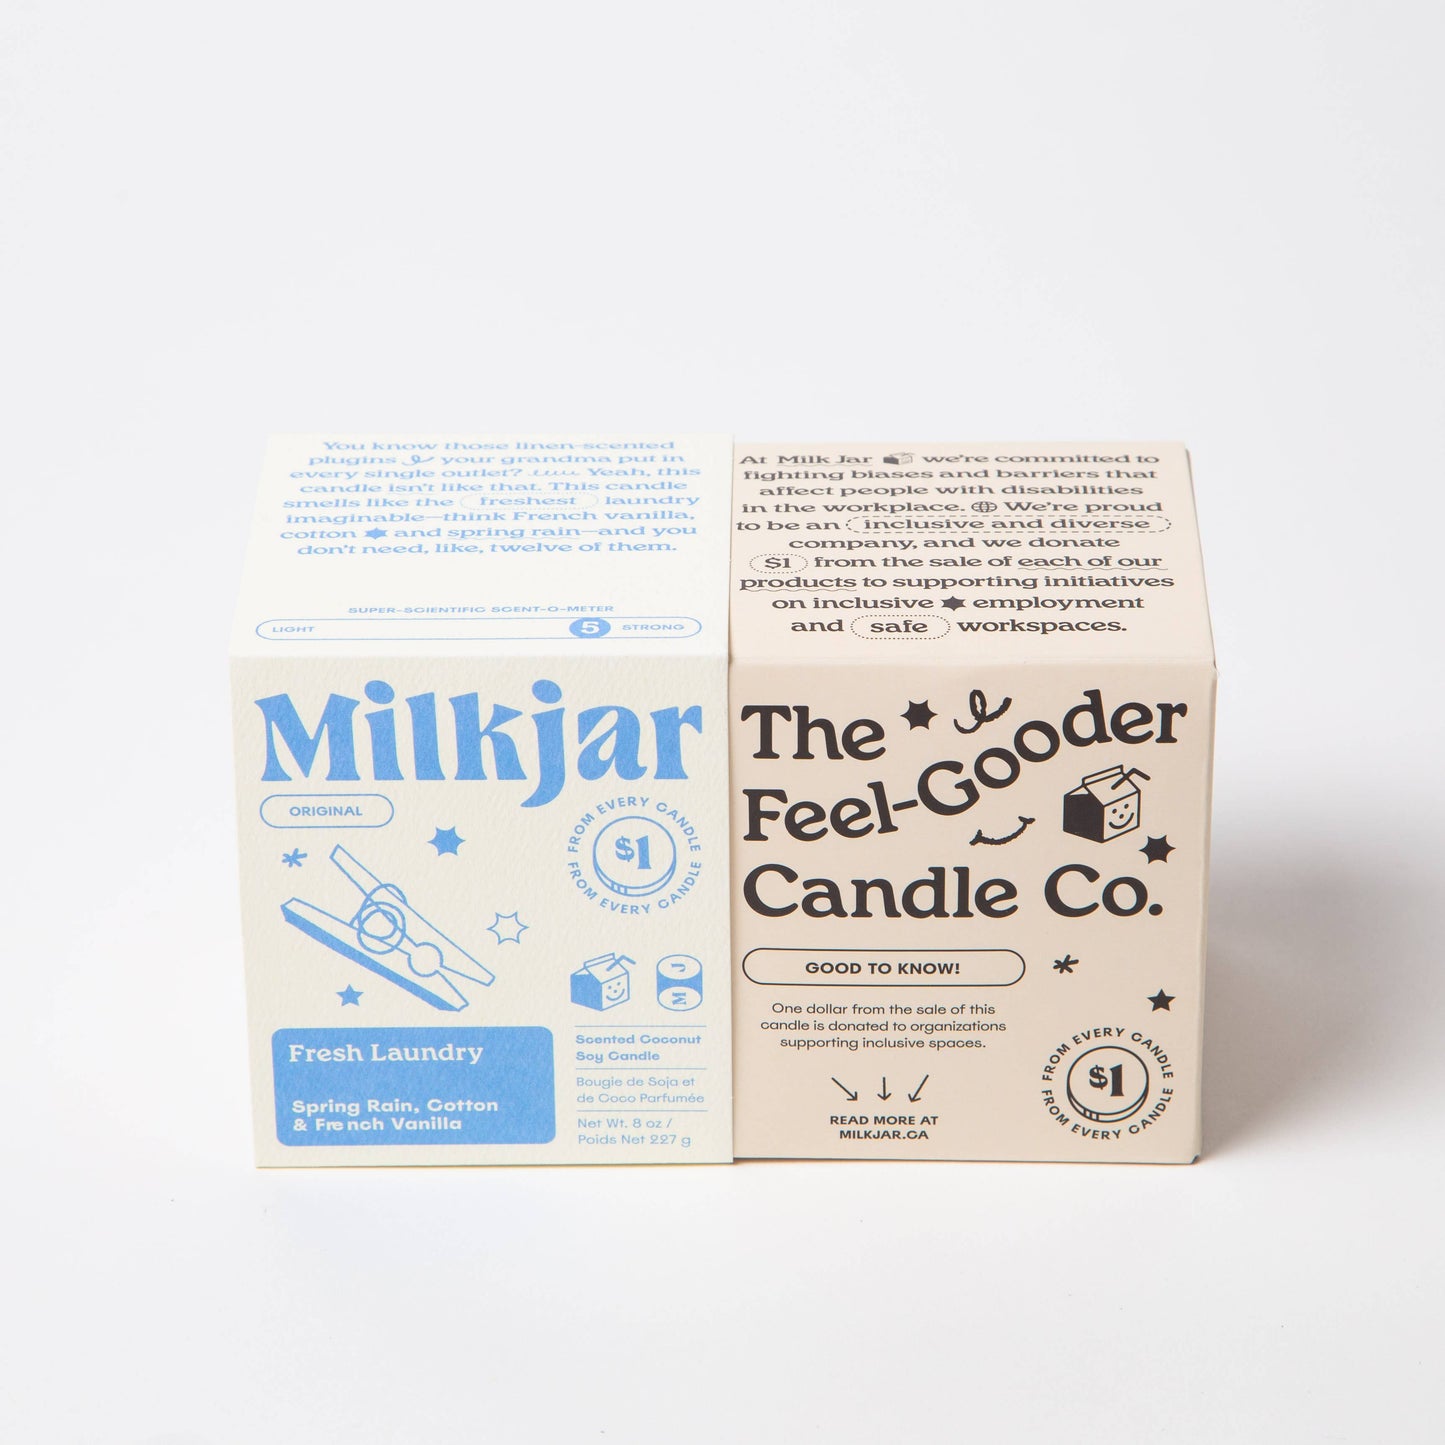 Milk Jar Candle Co. Fresh Laundry Scented Candle - Osmology Scented Candles & Home Fragrance